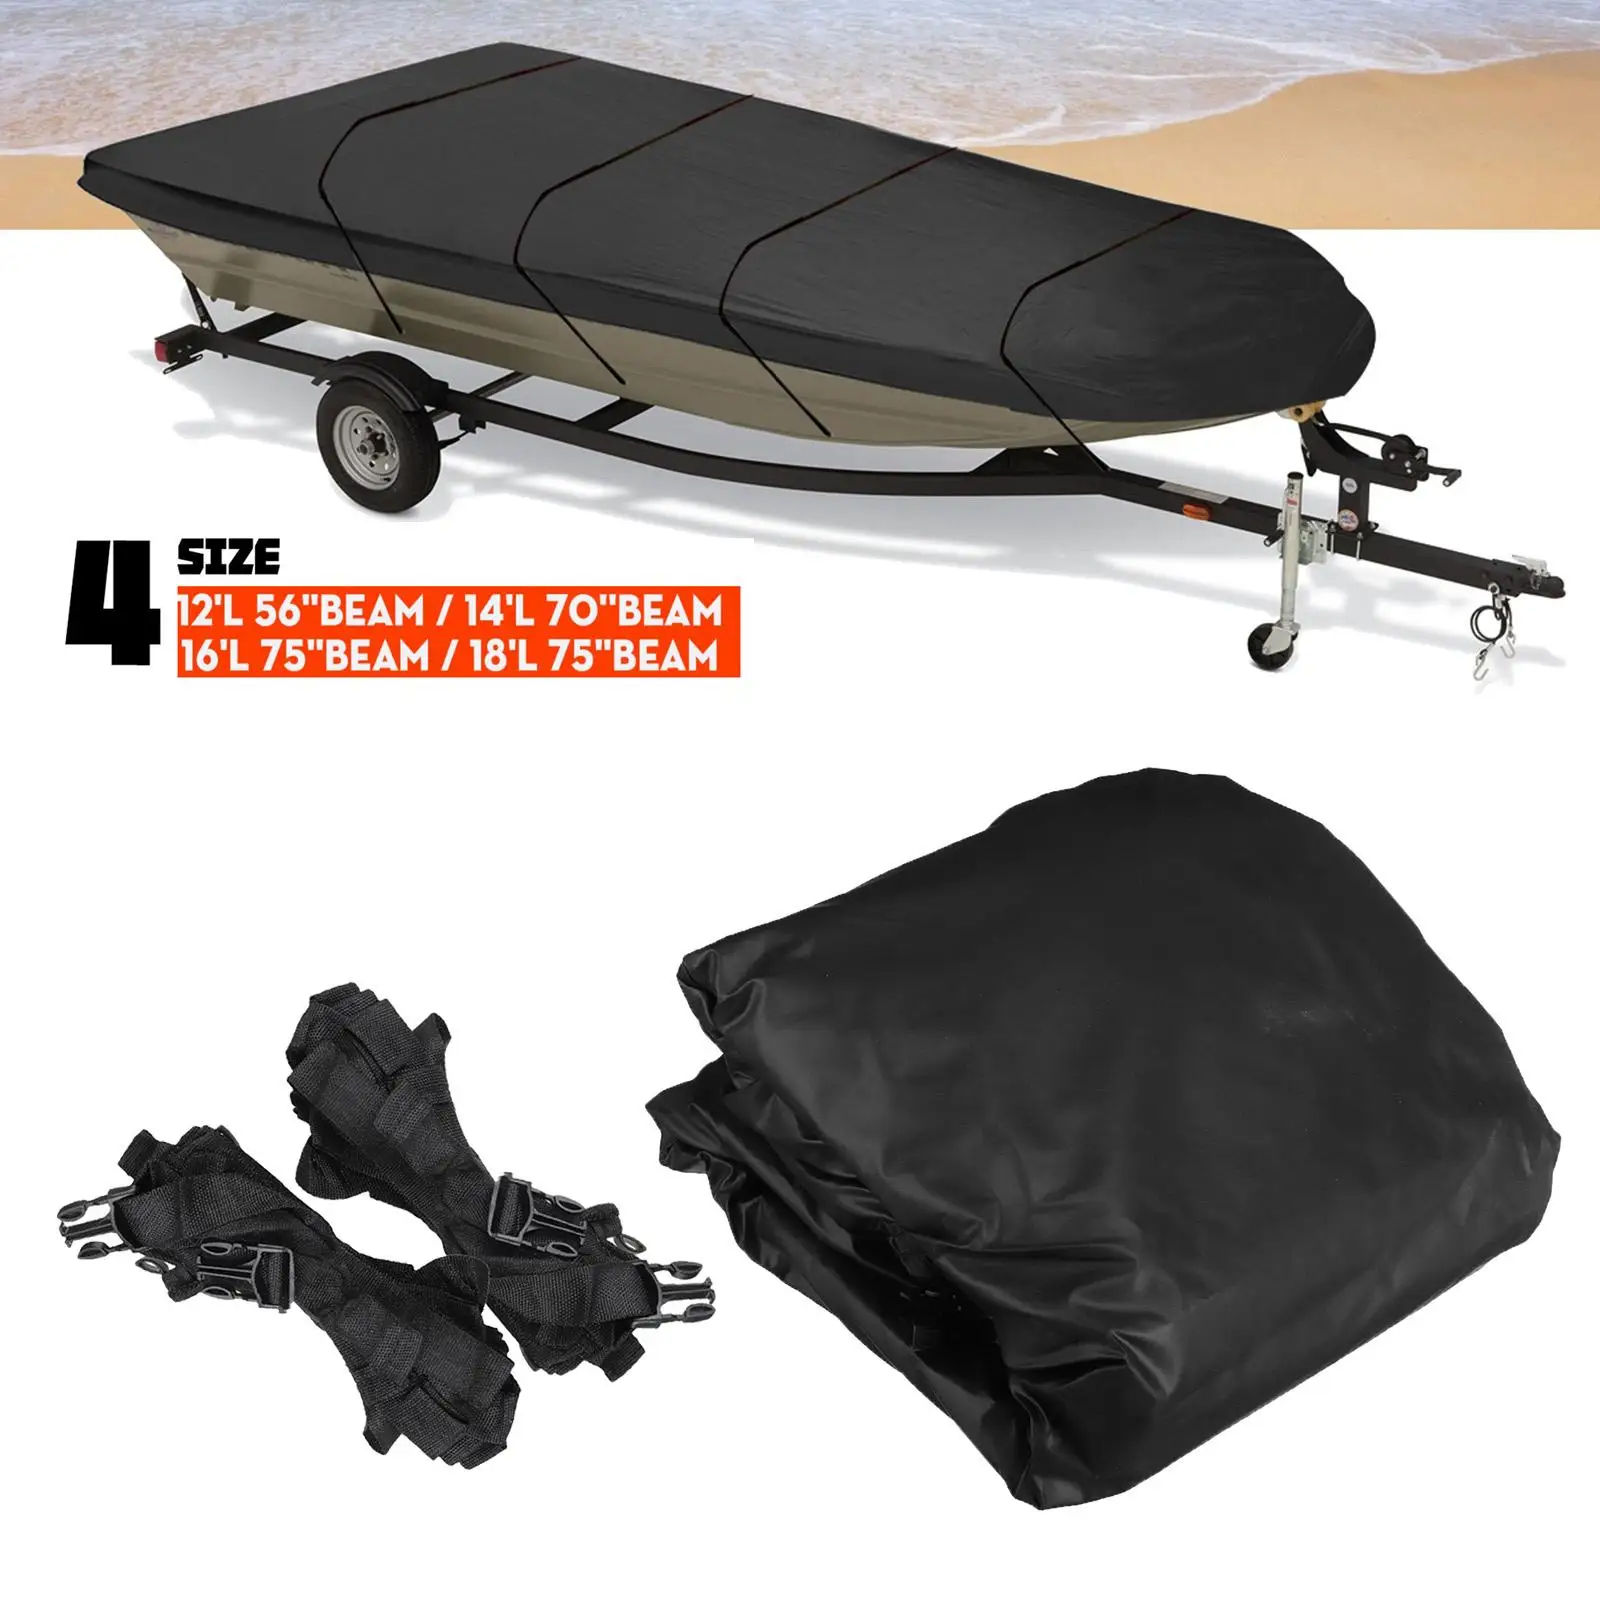 1 Set  Cover Dustproof Waterproof  Durable  Long-Term Replacement  for Trailerable Boat Heavy Duty Marine